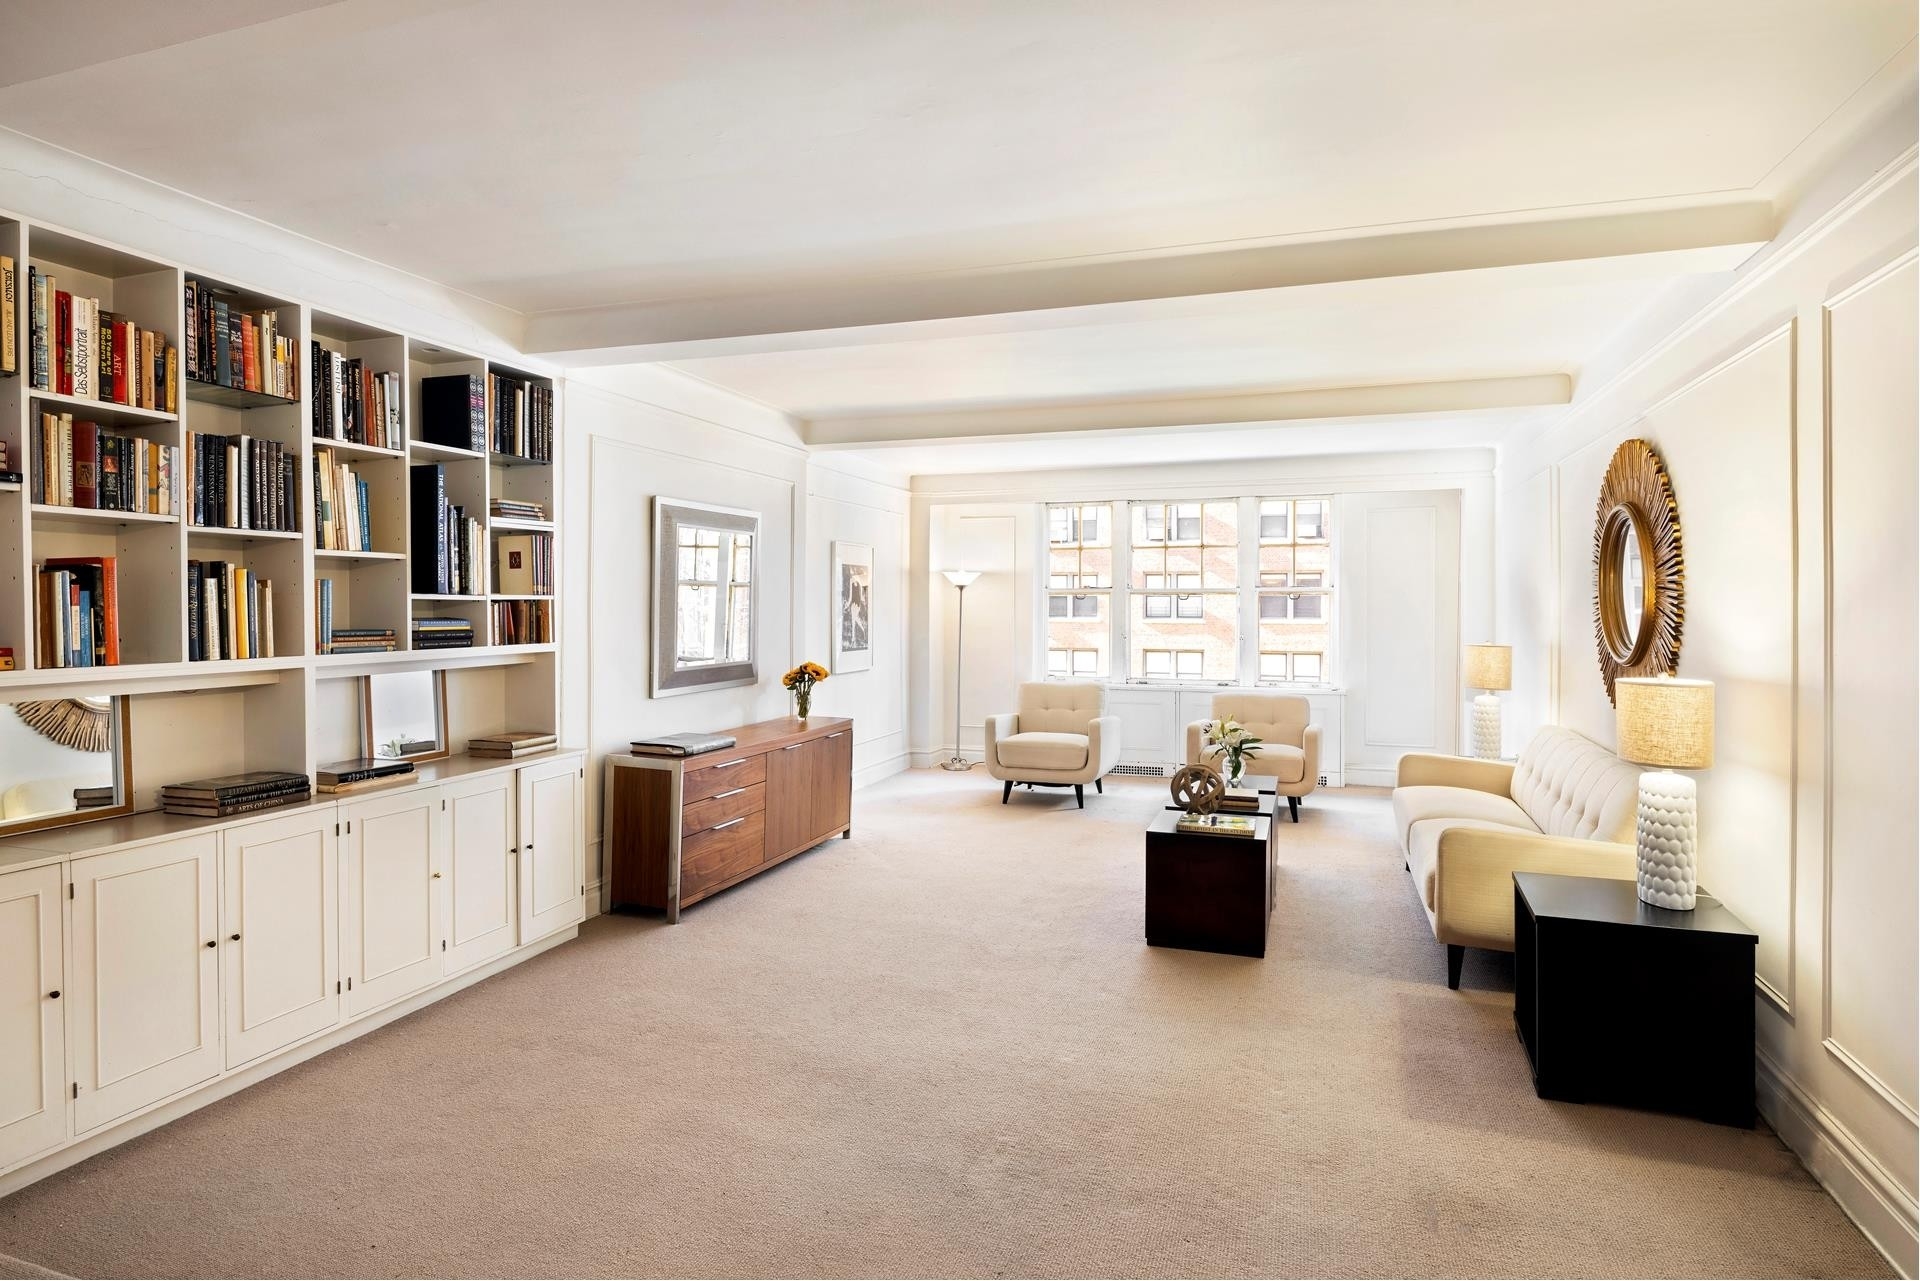 Co-op Properties for Sale at 450 W END AVE, 6C Upper West Side, New York, NY 10024